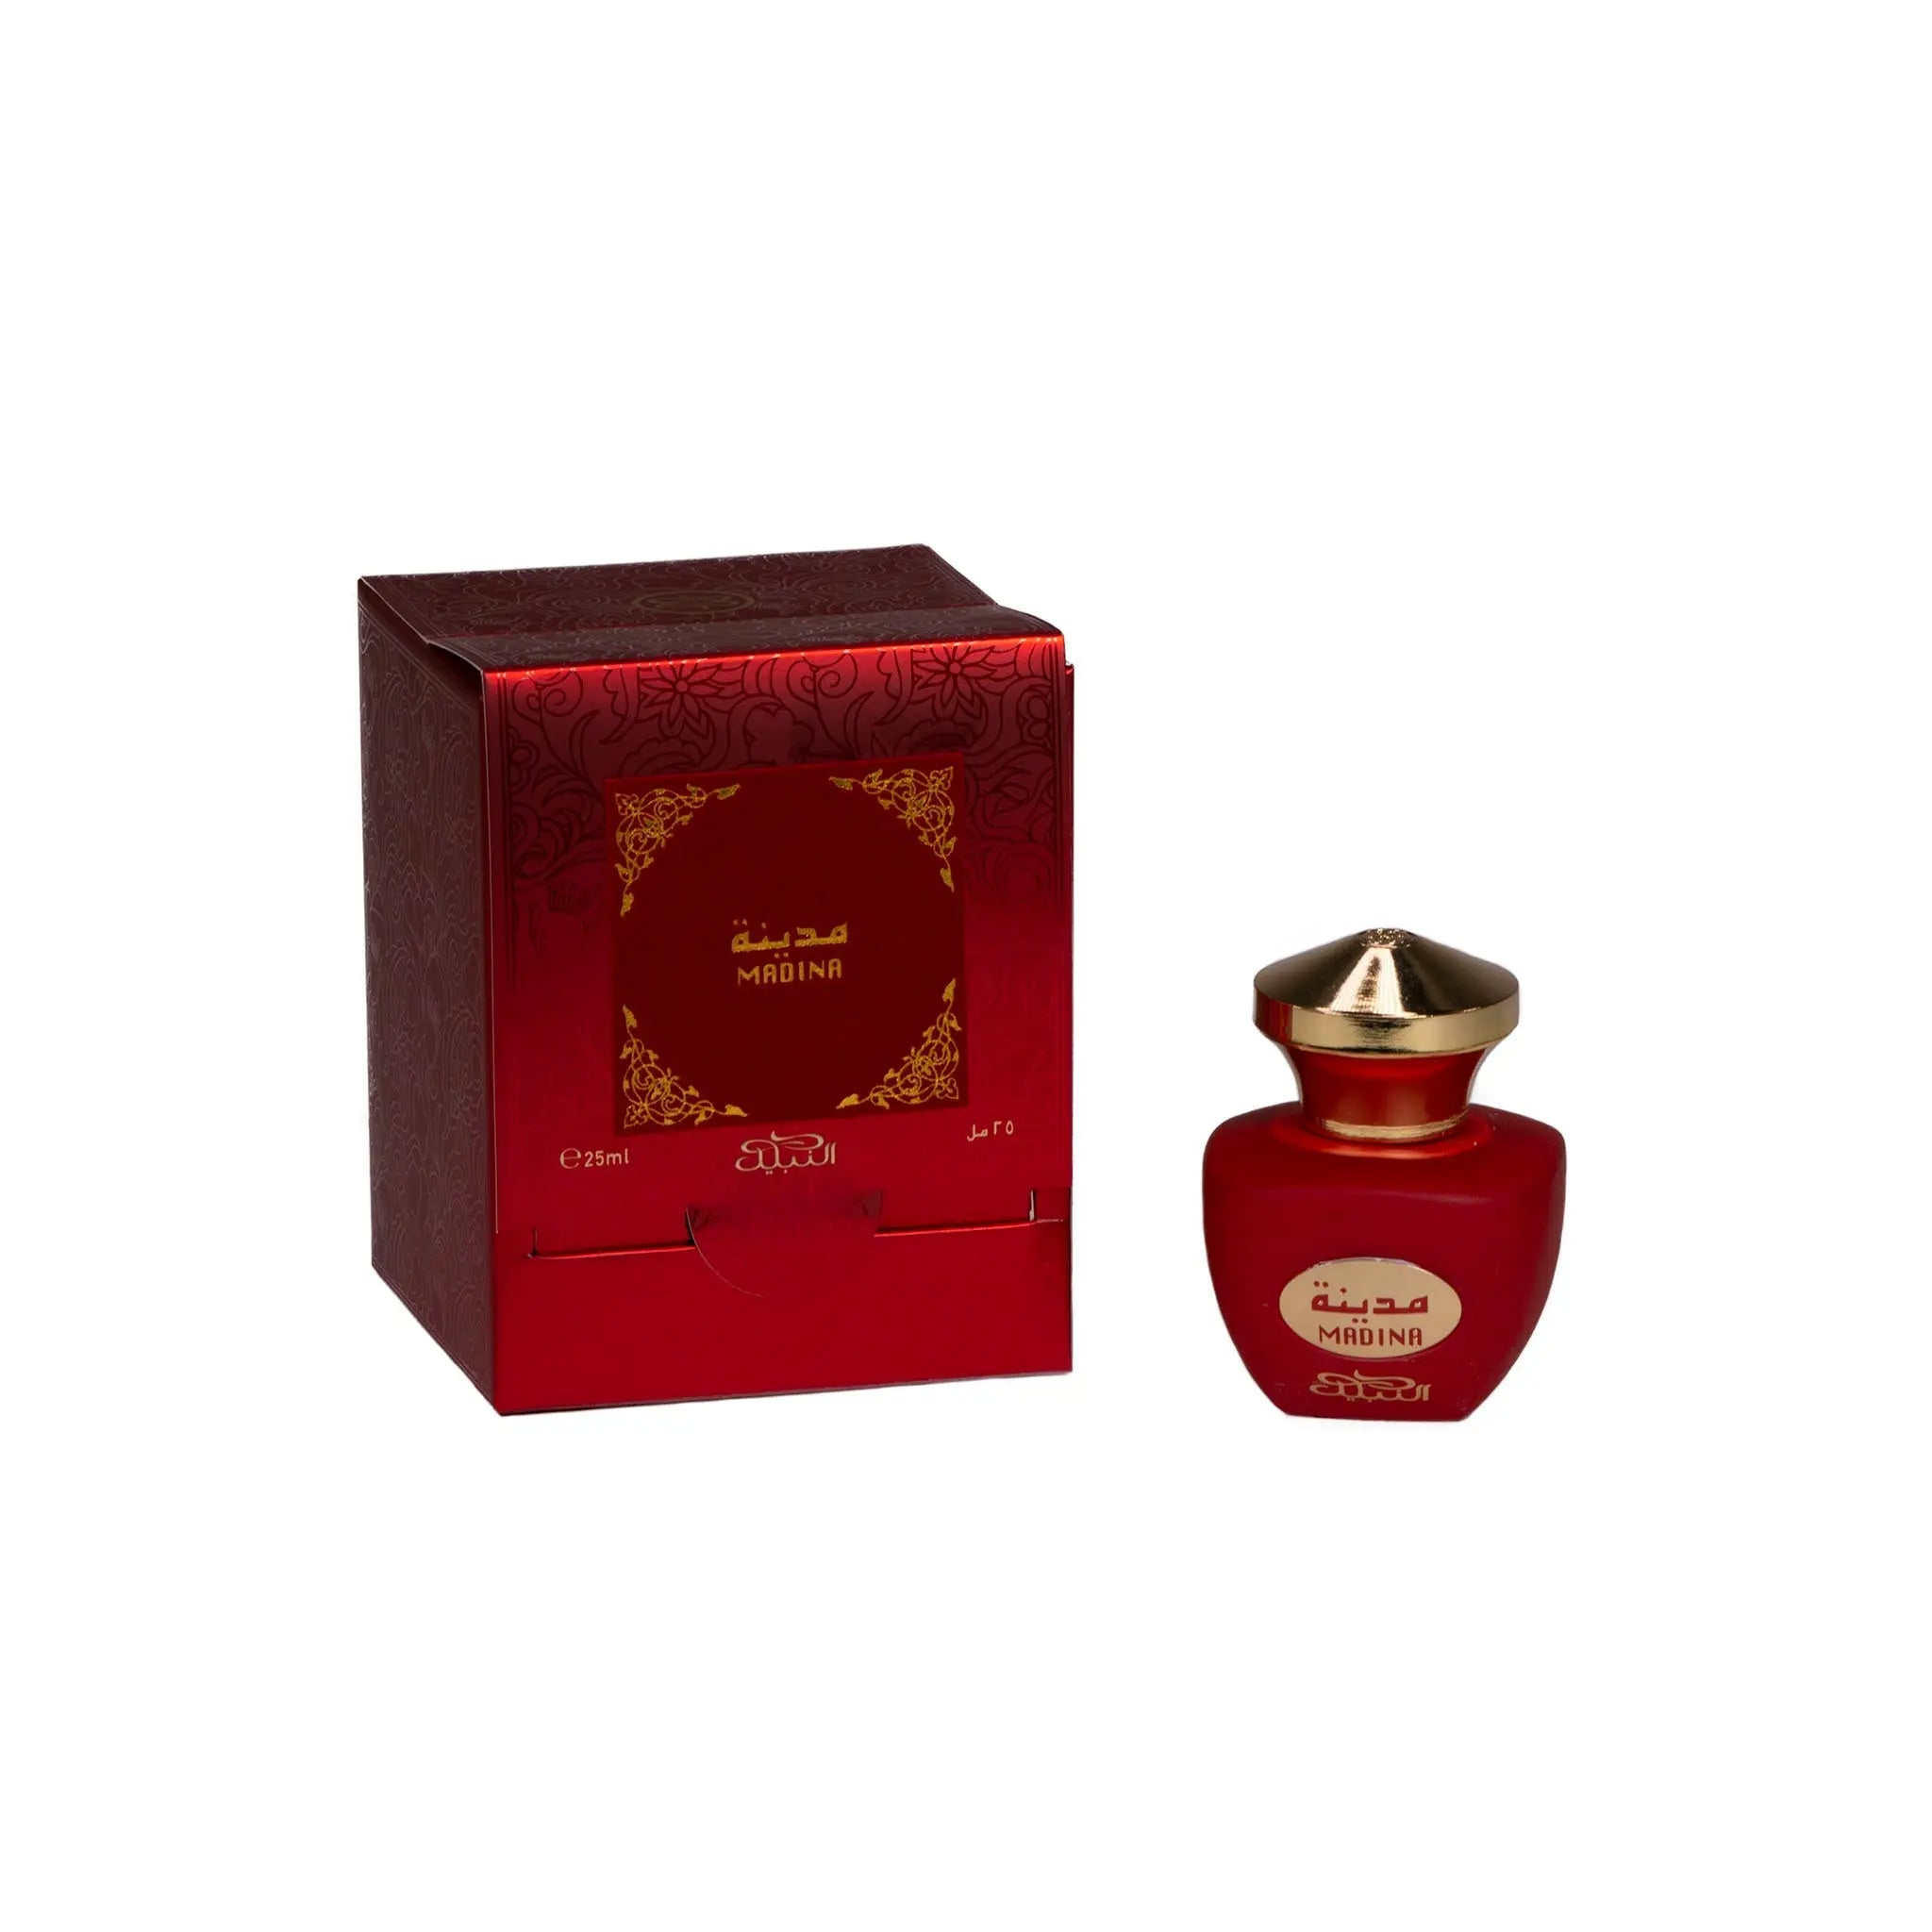 The image displays a perfume product called "MADINA" from Nabeel Perfumes. It includes a red perfume bottle with a gold-colored cap and the name "MADINA" in both Arabic and English script on the label. The accompanying box is also red and features embossed floral patterns with a golden frame around the label area, which also reads "MADINA" in Arabic and English. The box indicates a volume of "25ml" and has the brand name "nabeel" at the bottom.